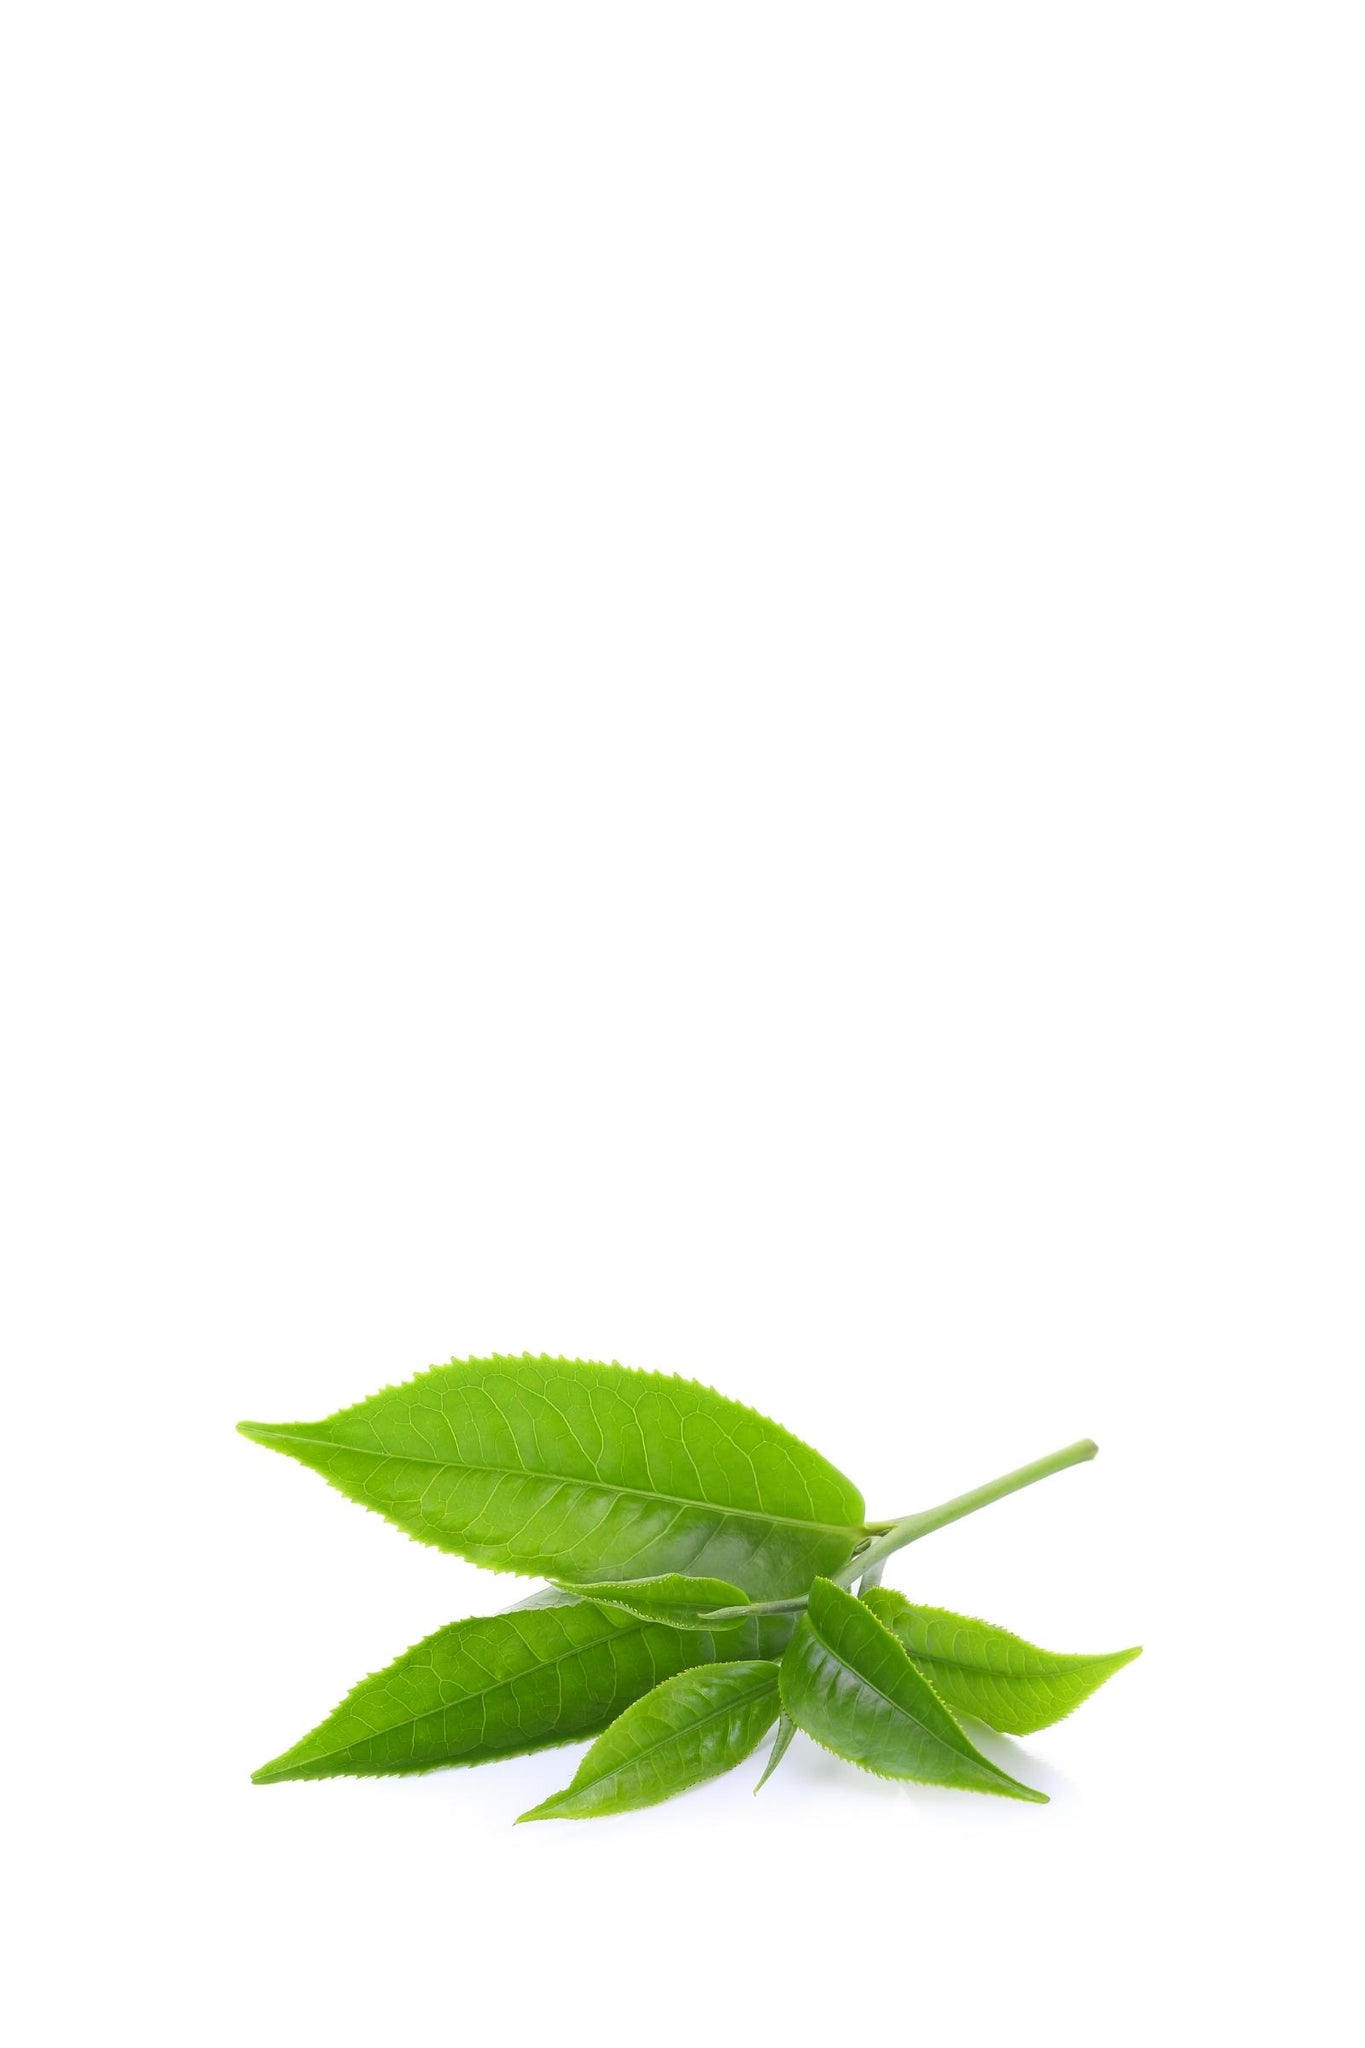 L-theanine is a nootropic and rare amino acid extracted from green tea leaves used to enhance alpha brainwaves for a state of relaxed alertness and heightened creativity.